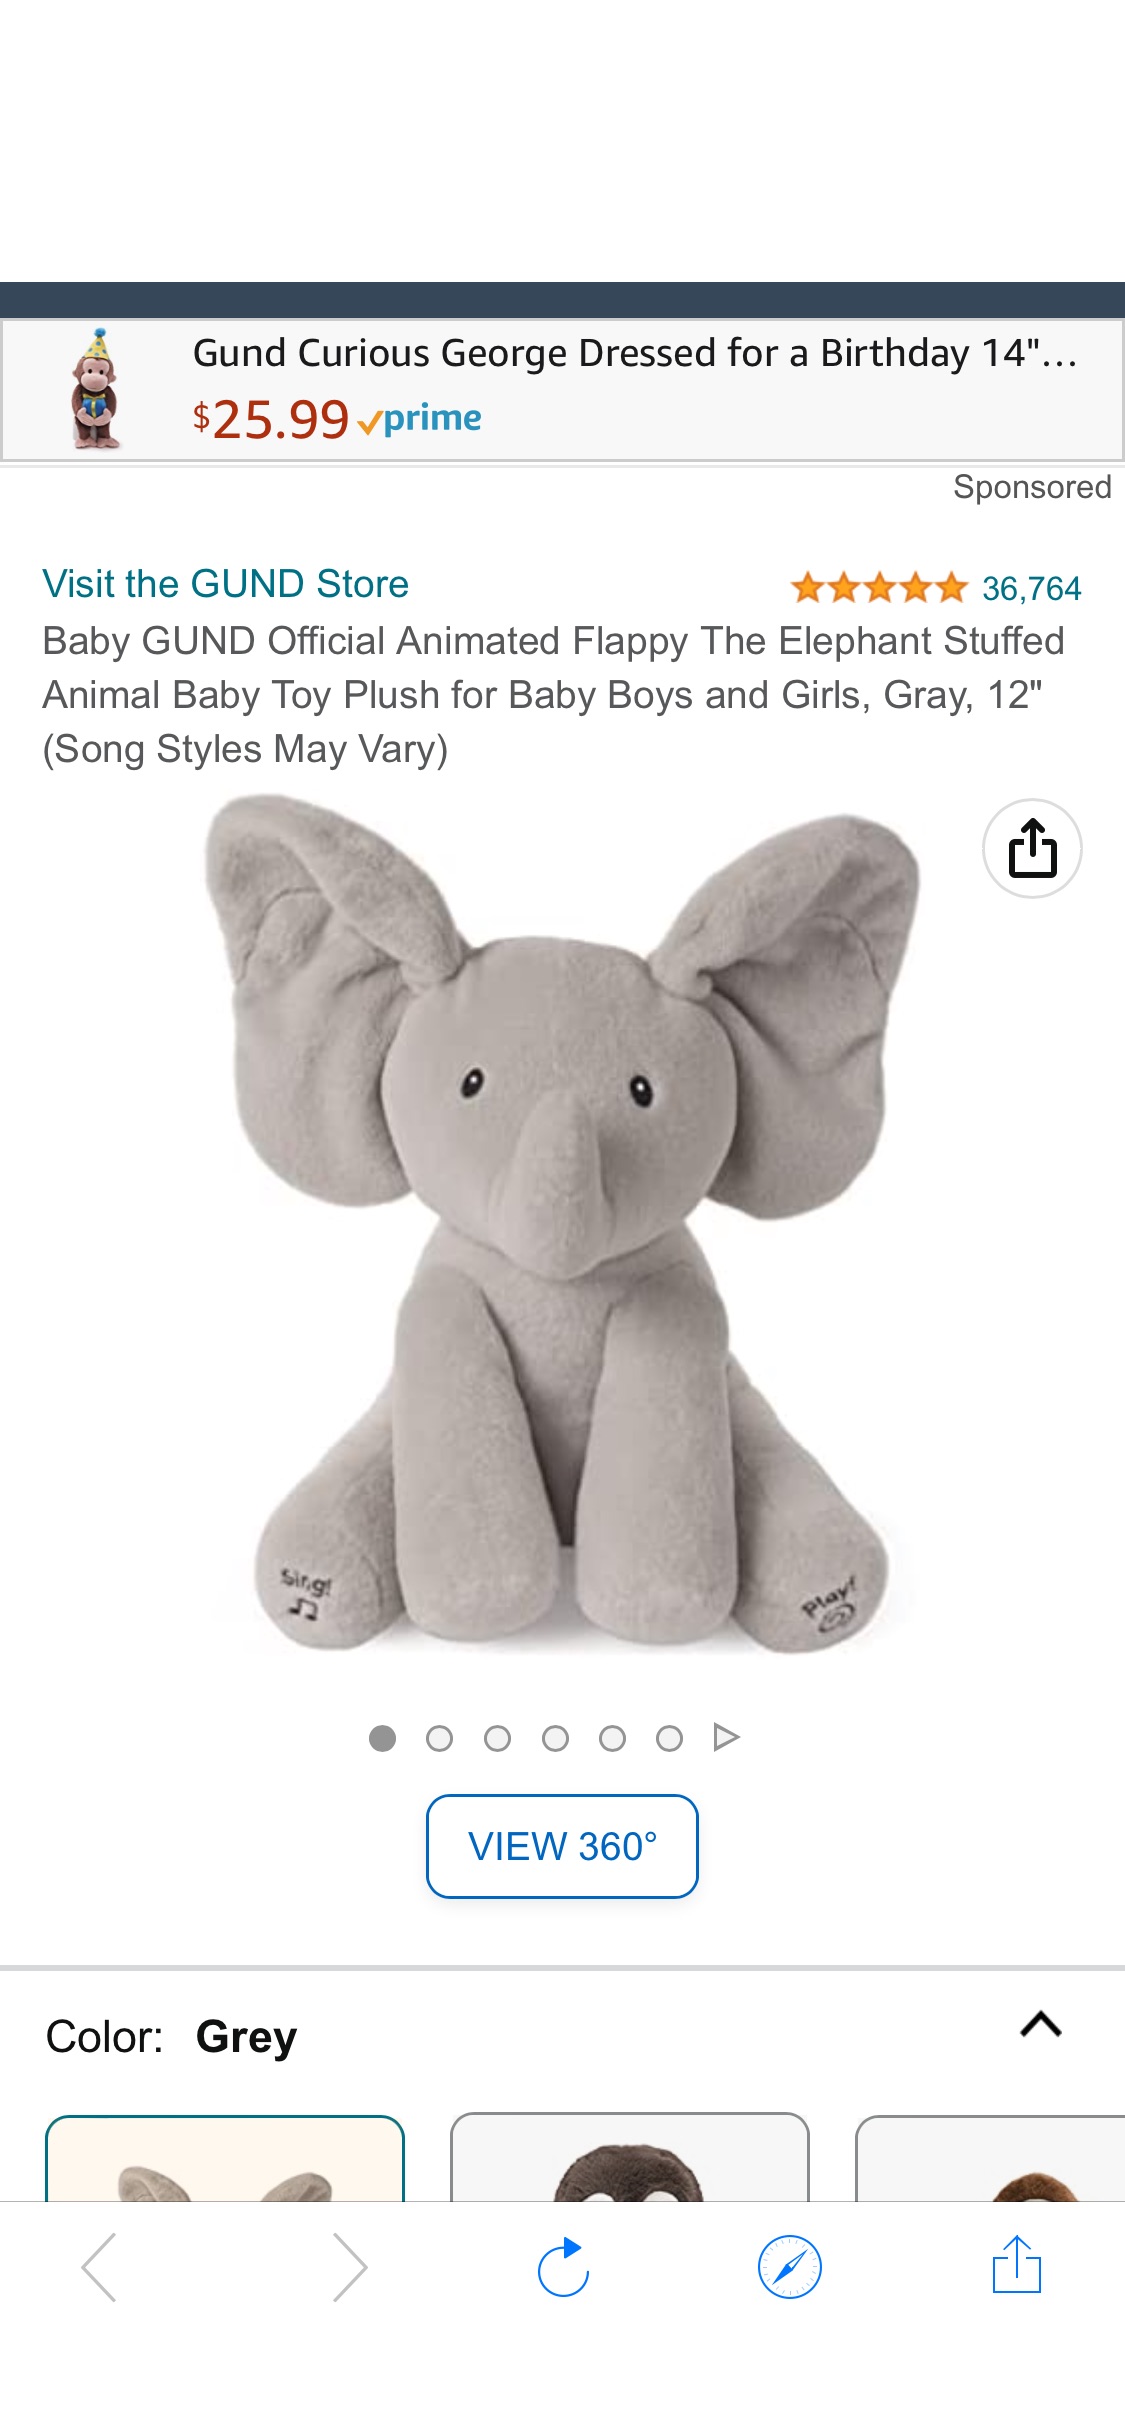 Amazon.com: Baby GUND Animated Flappy The Elephant Stuffed Animal Baby Toy Plush for Baby Boys and Girls, Gray, 12" (Styles May Vary) : Toys & Games